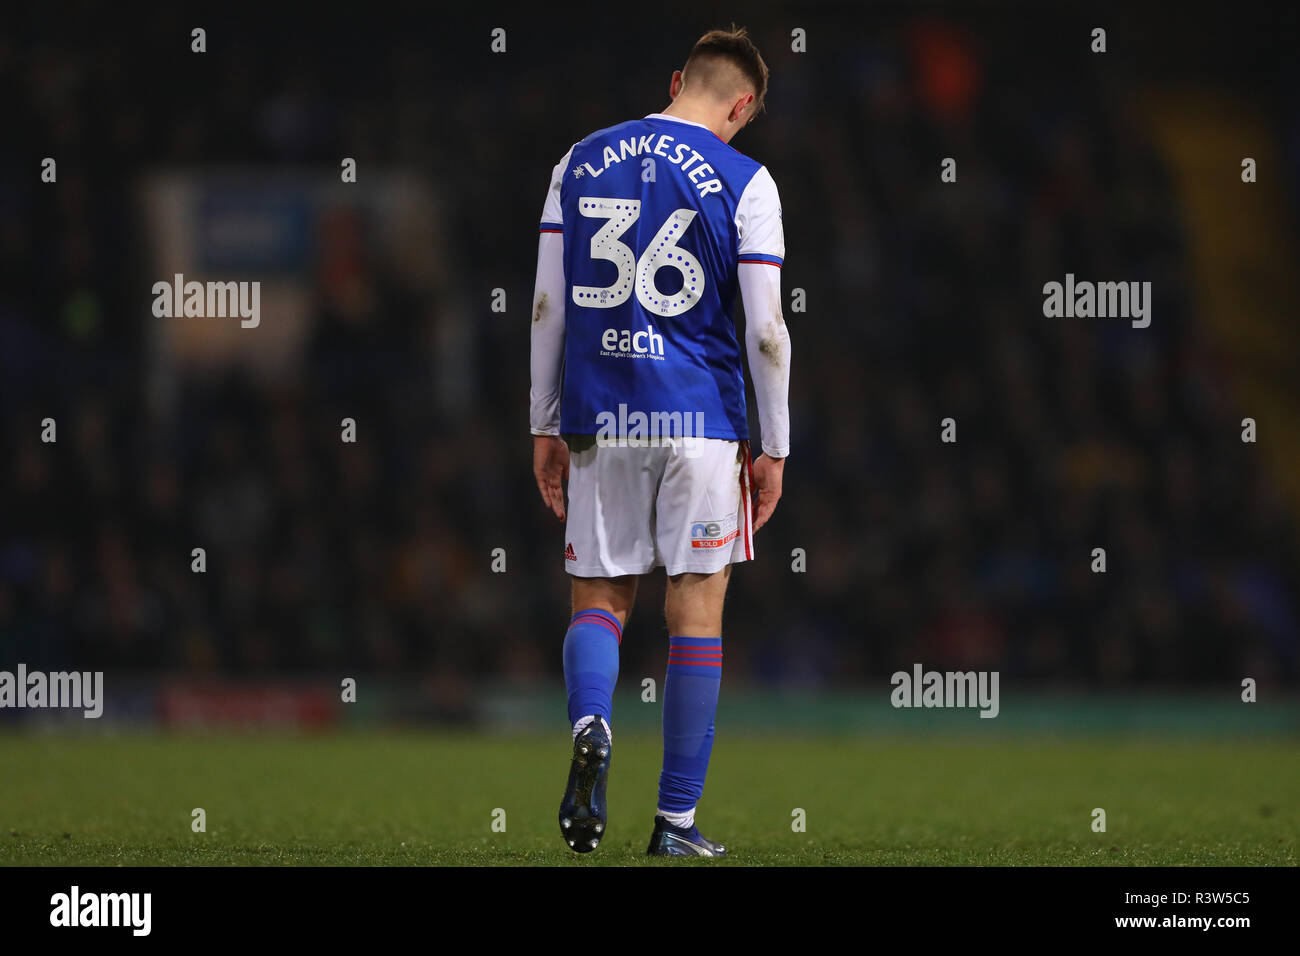 Jack Lankester of Ipswich Town - Ipswich Town v West Bromwich Albion, Sky Bet Championship, Portman Road, Ipswich - 23rd November 2018 Stock Photo